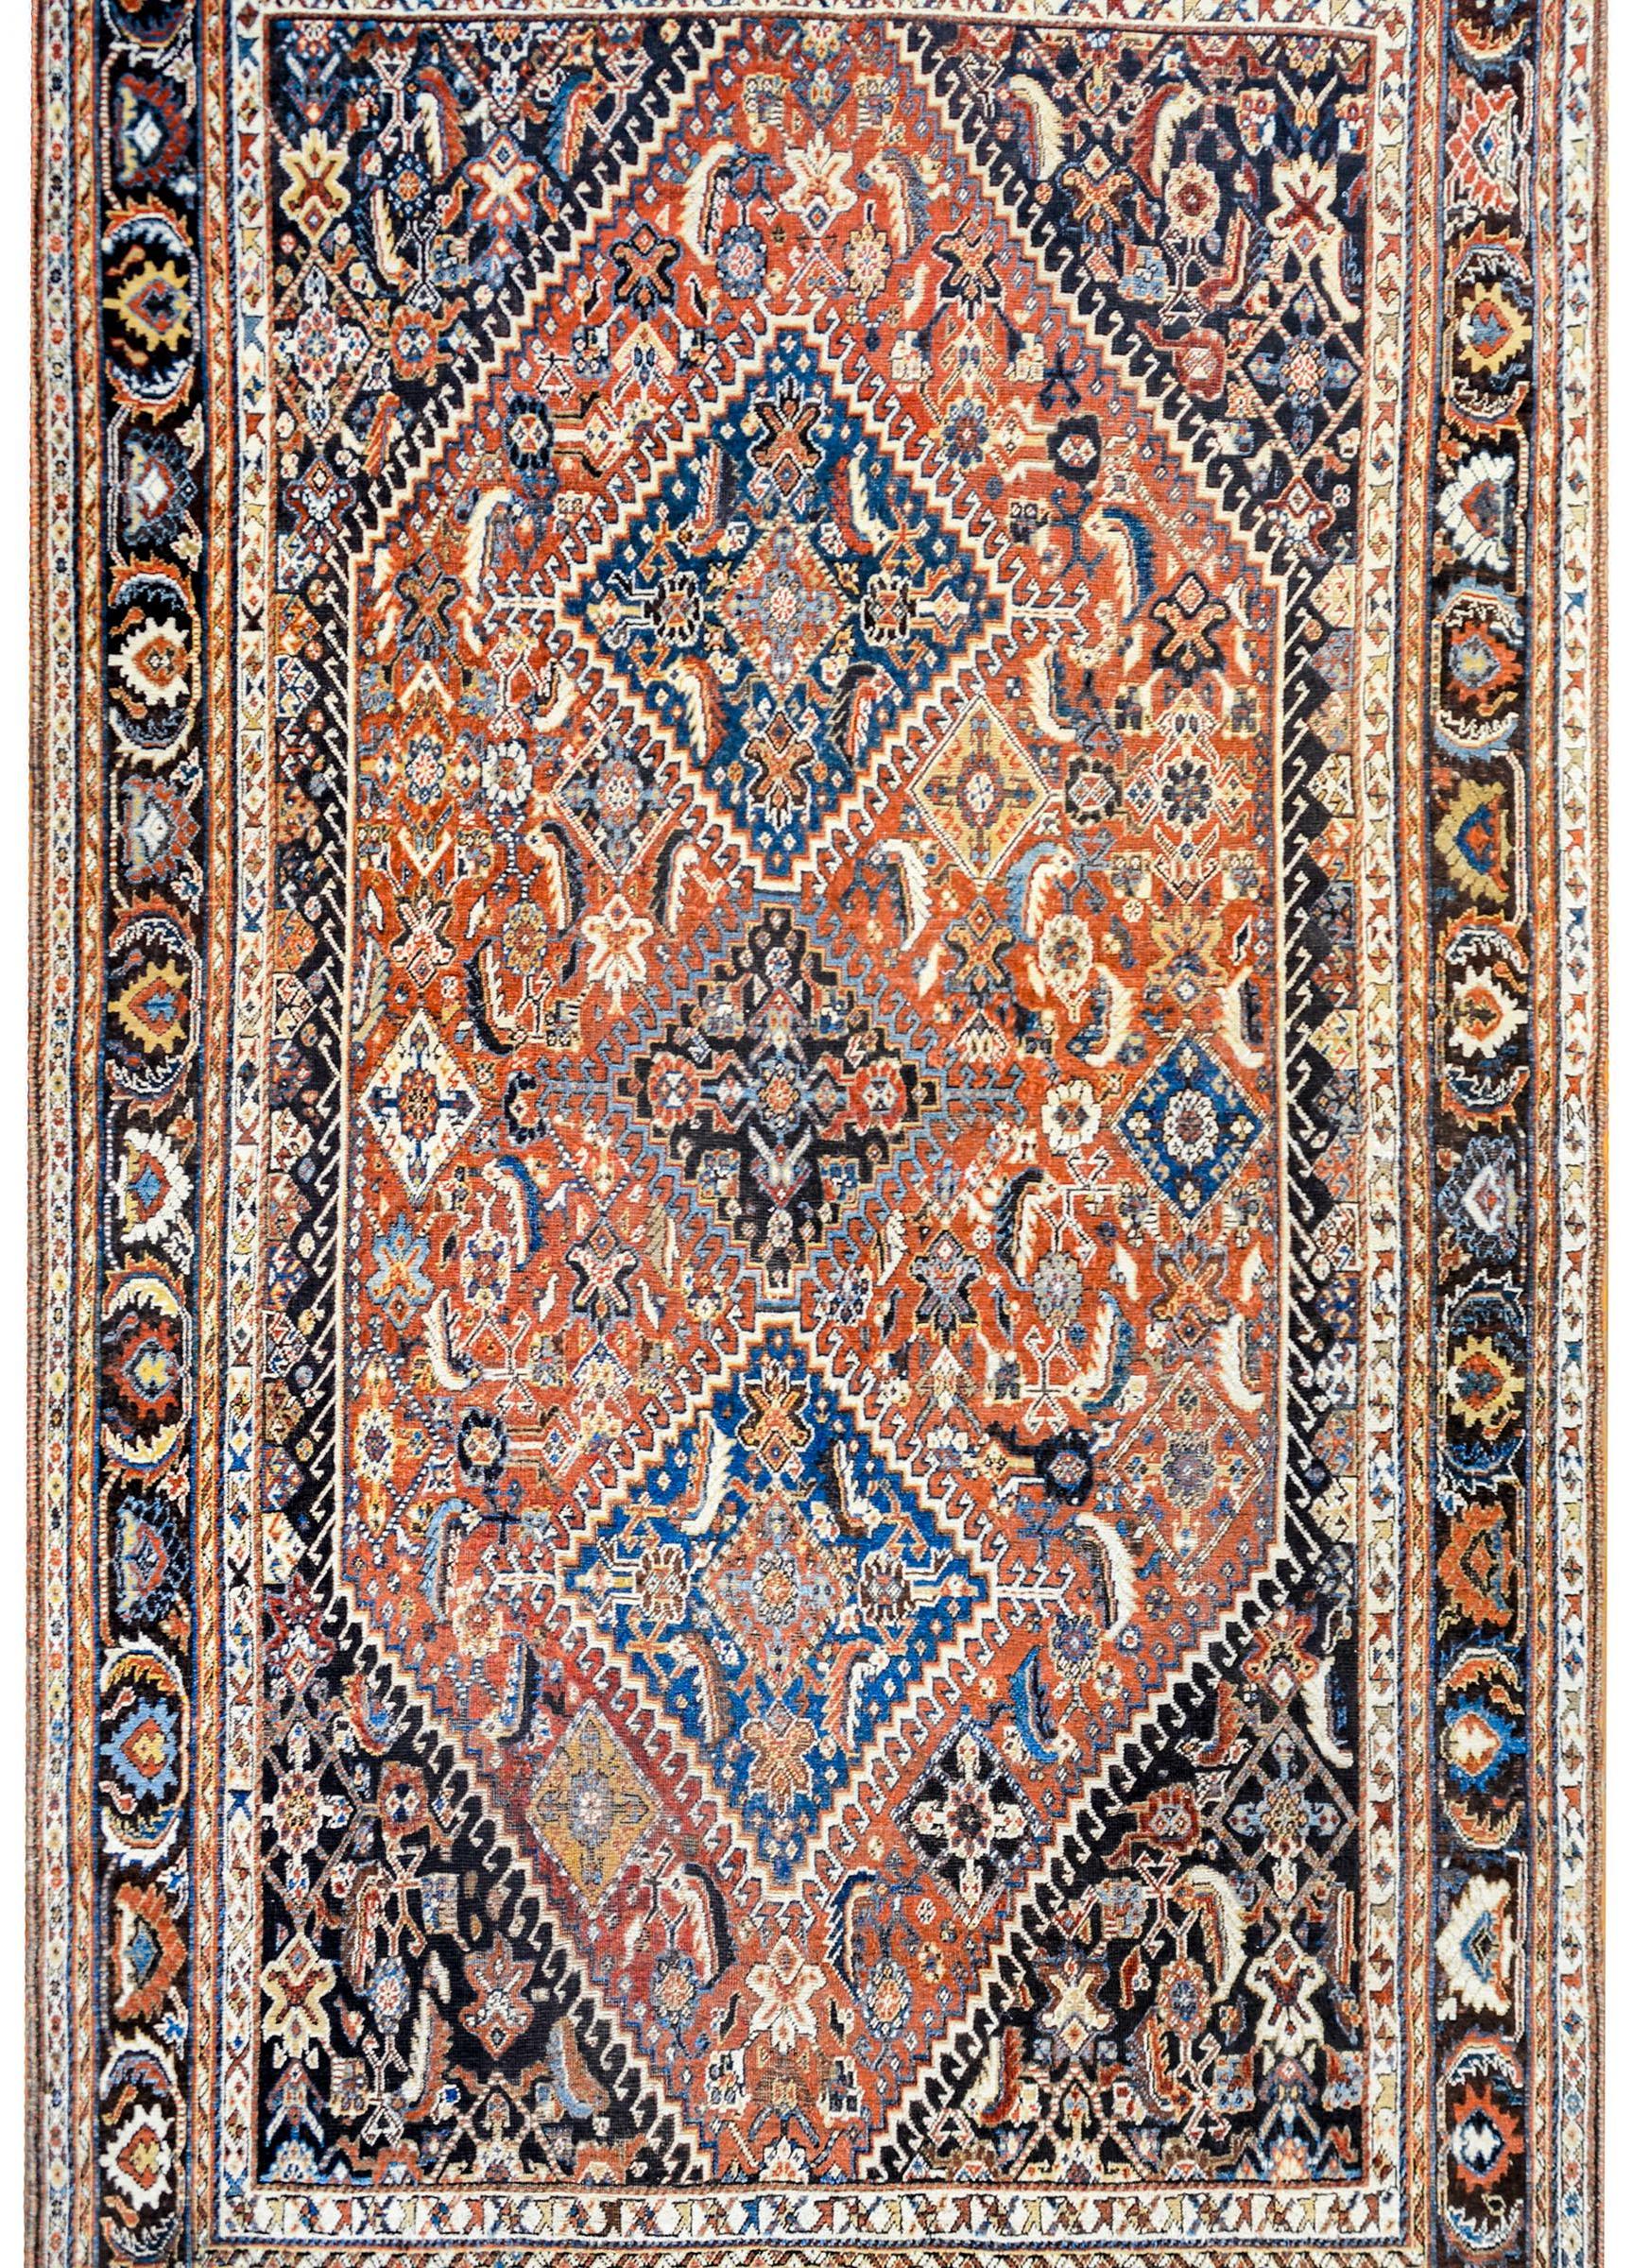 A wonderful early 20th century Persian Ghashghaei rug with three large central diamond medallions each woven with stylized floral and leaf motifs on a beautiful crimson field of flowers and leaves. The border is wide with a large-scale floral